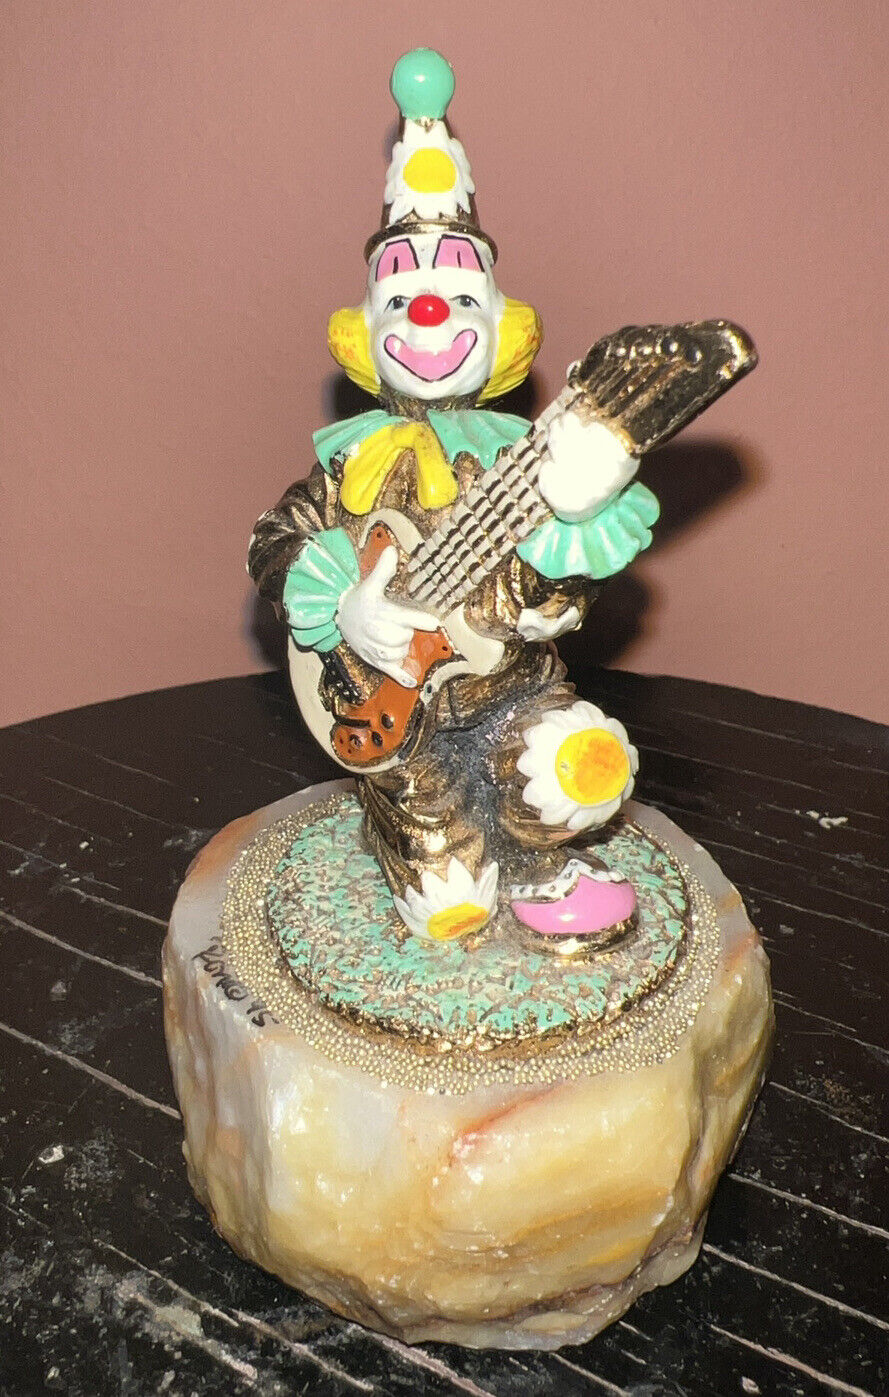 ROCK-A-BILLY RON LEE Clown Figurine Guitar Happy Face Music Statue Daisy Stone